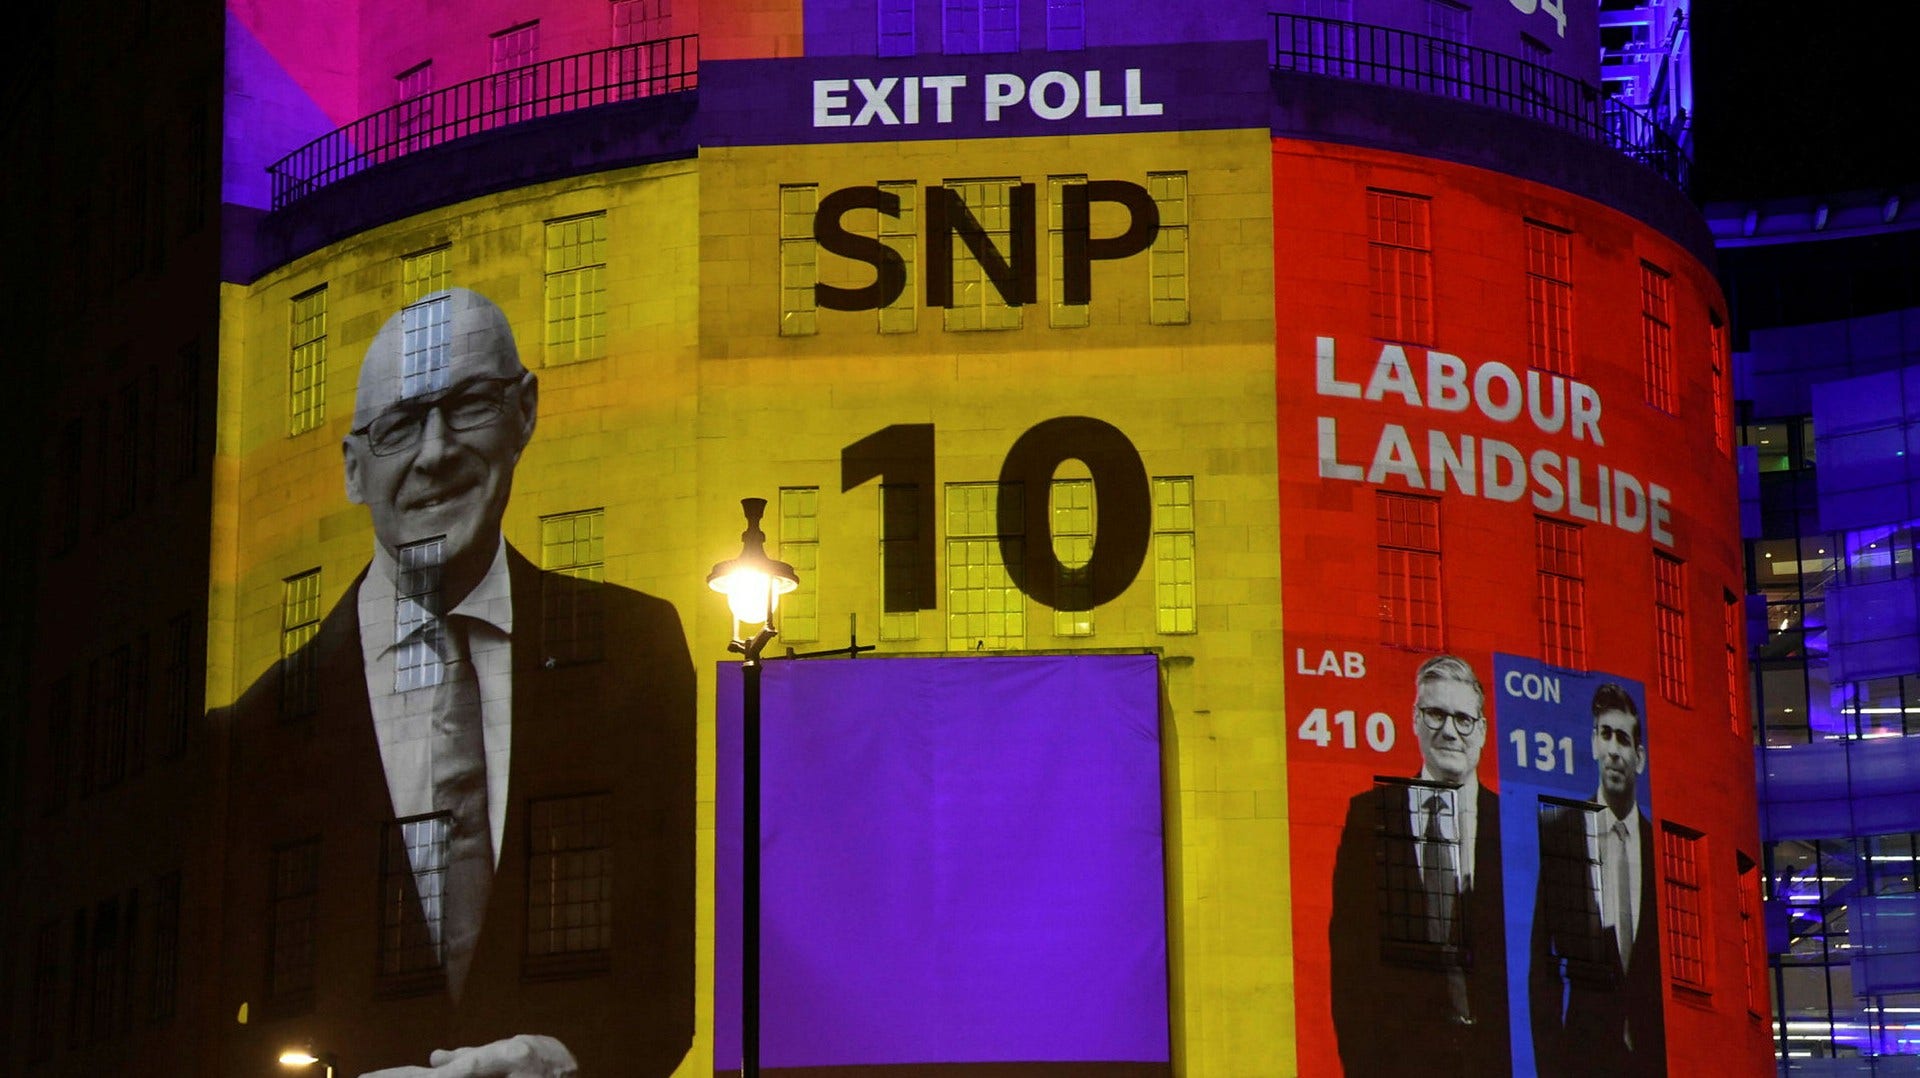 The SNP in Scotland has its worst election since 2010